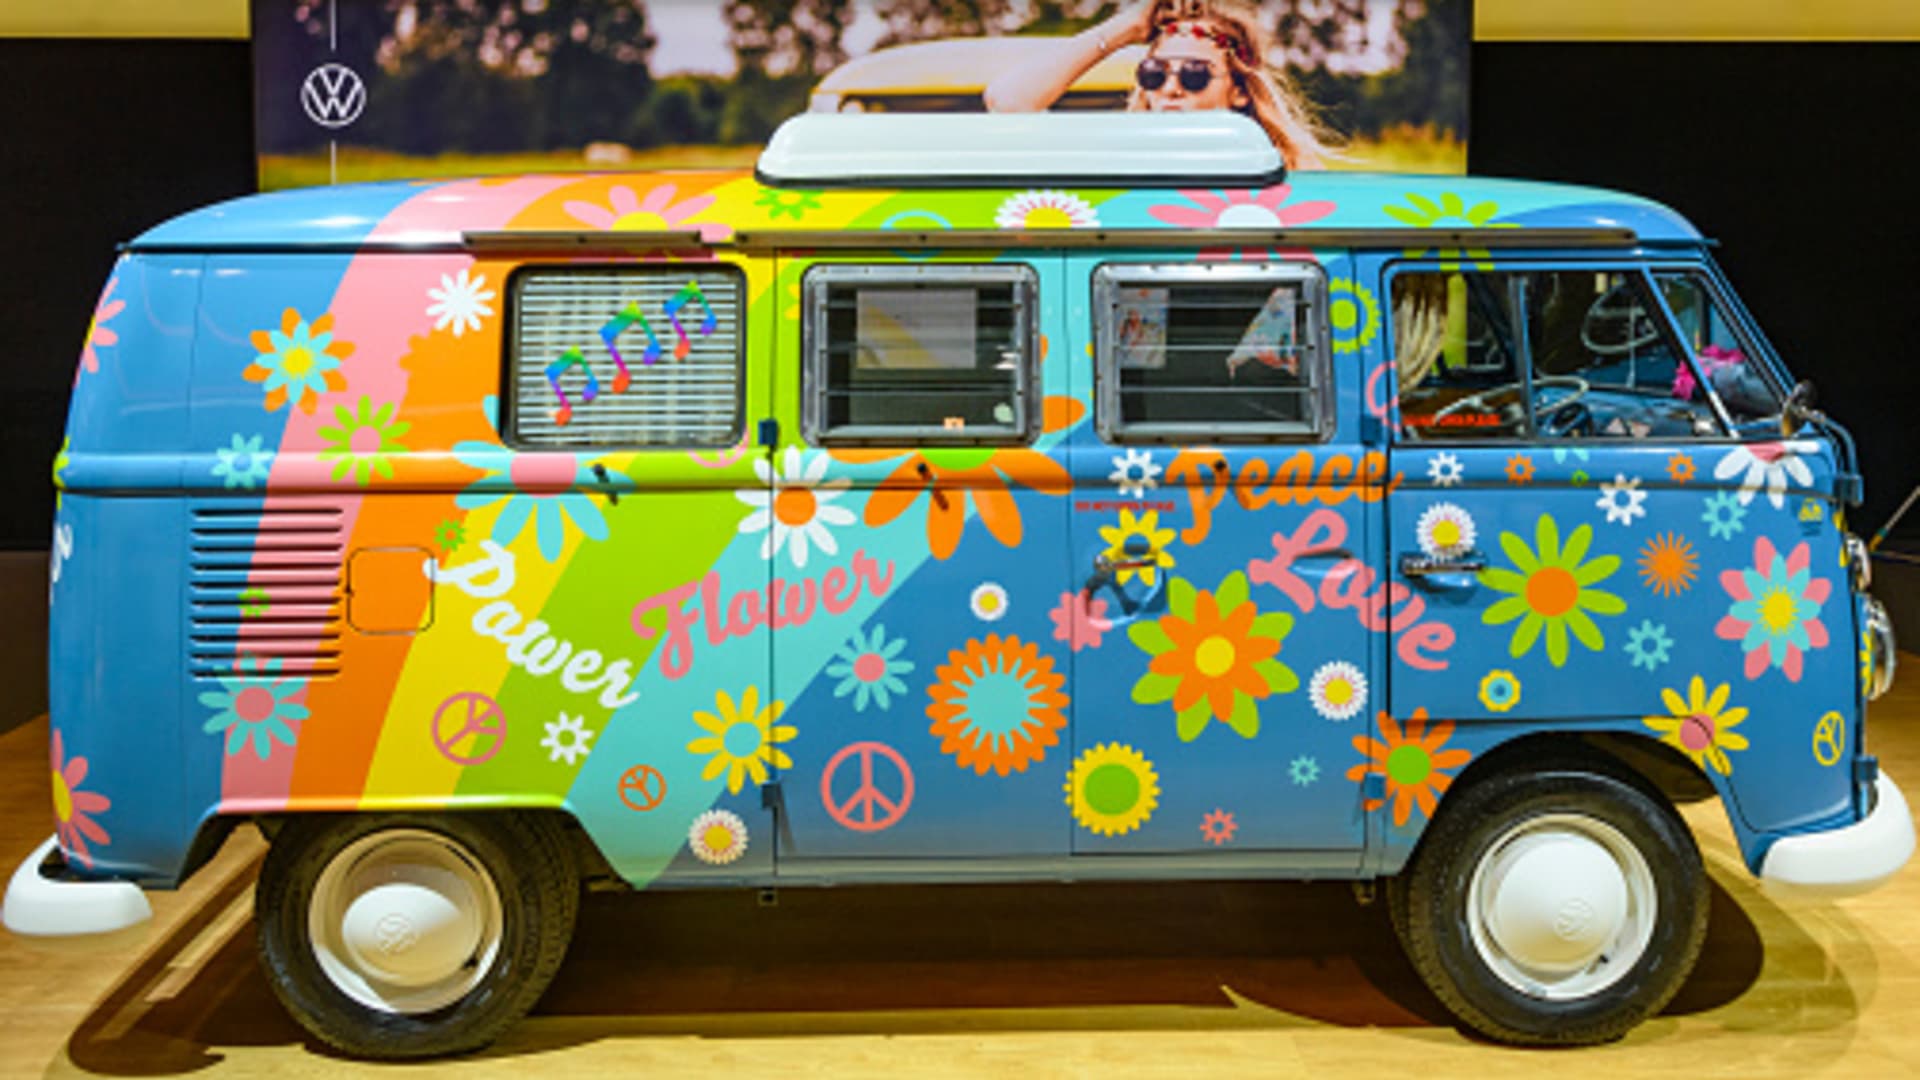 opladen Opschudding voor eeuwig After the 'hippie' bus and Beetle, VW makes eyes at America once again